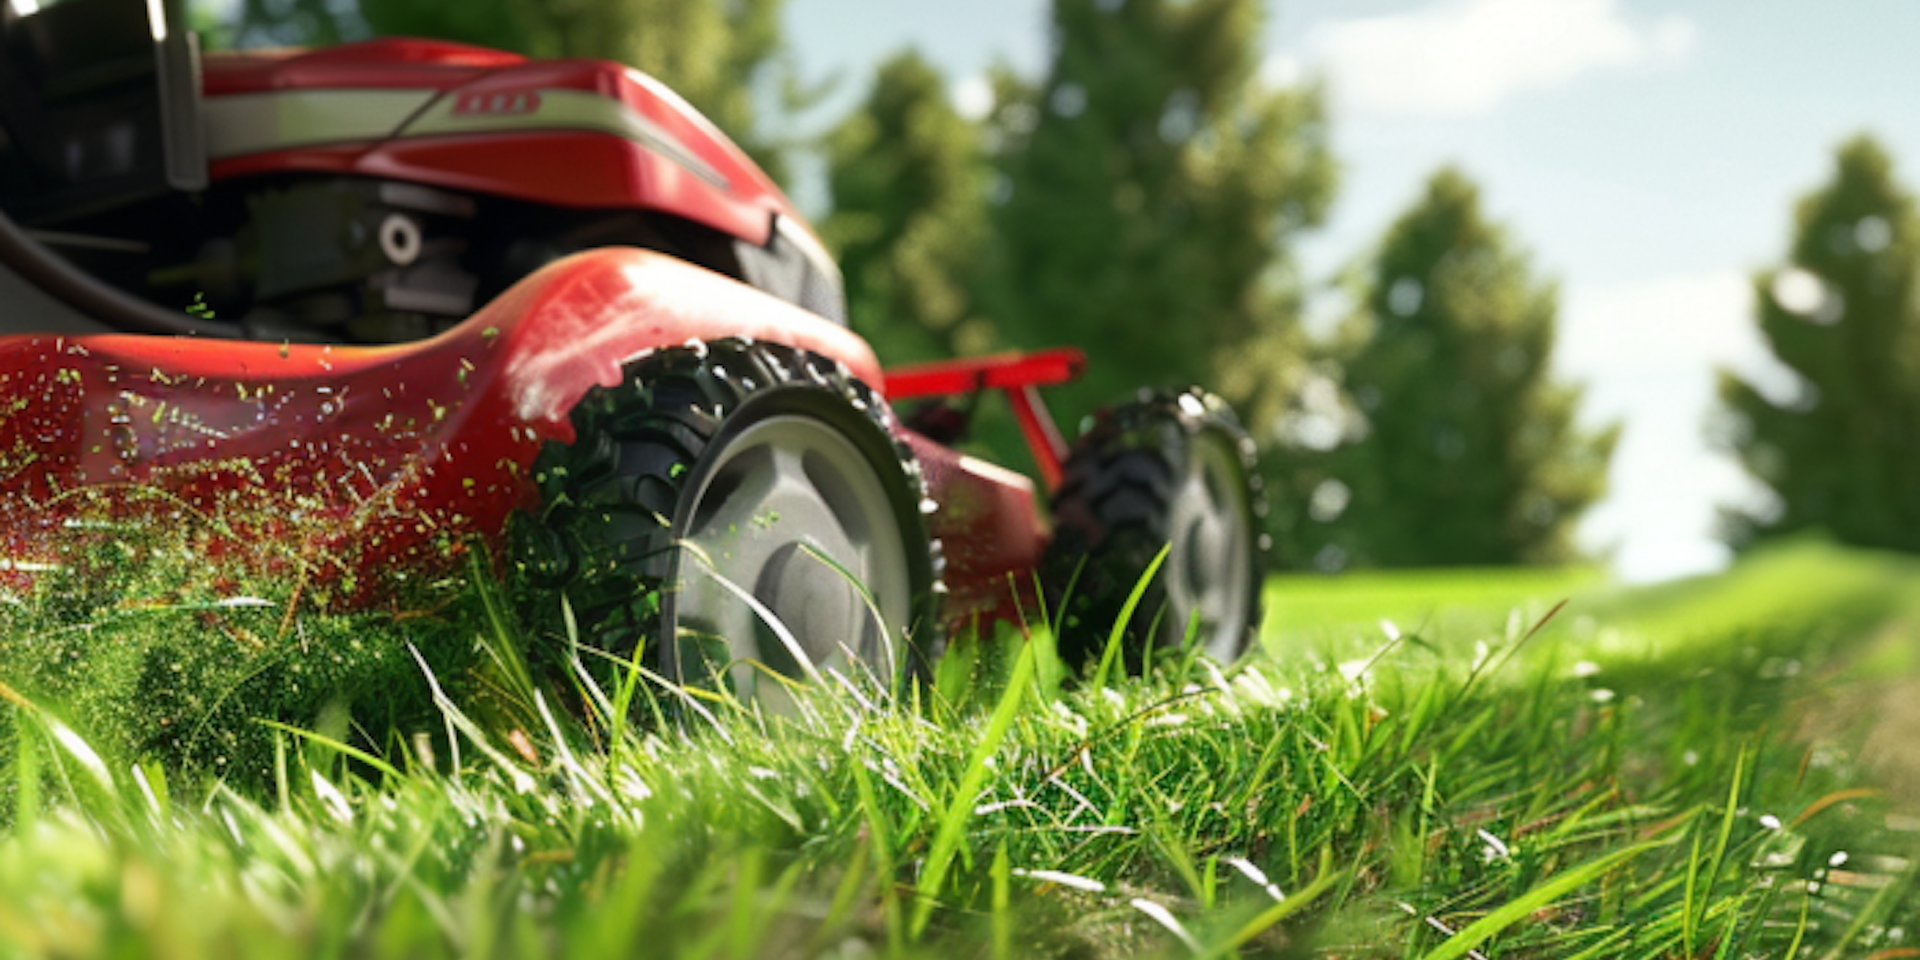 yard pest control involves many simple lawn care habits